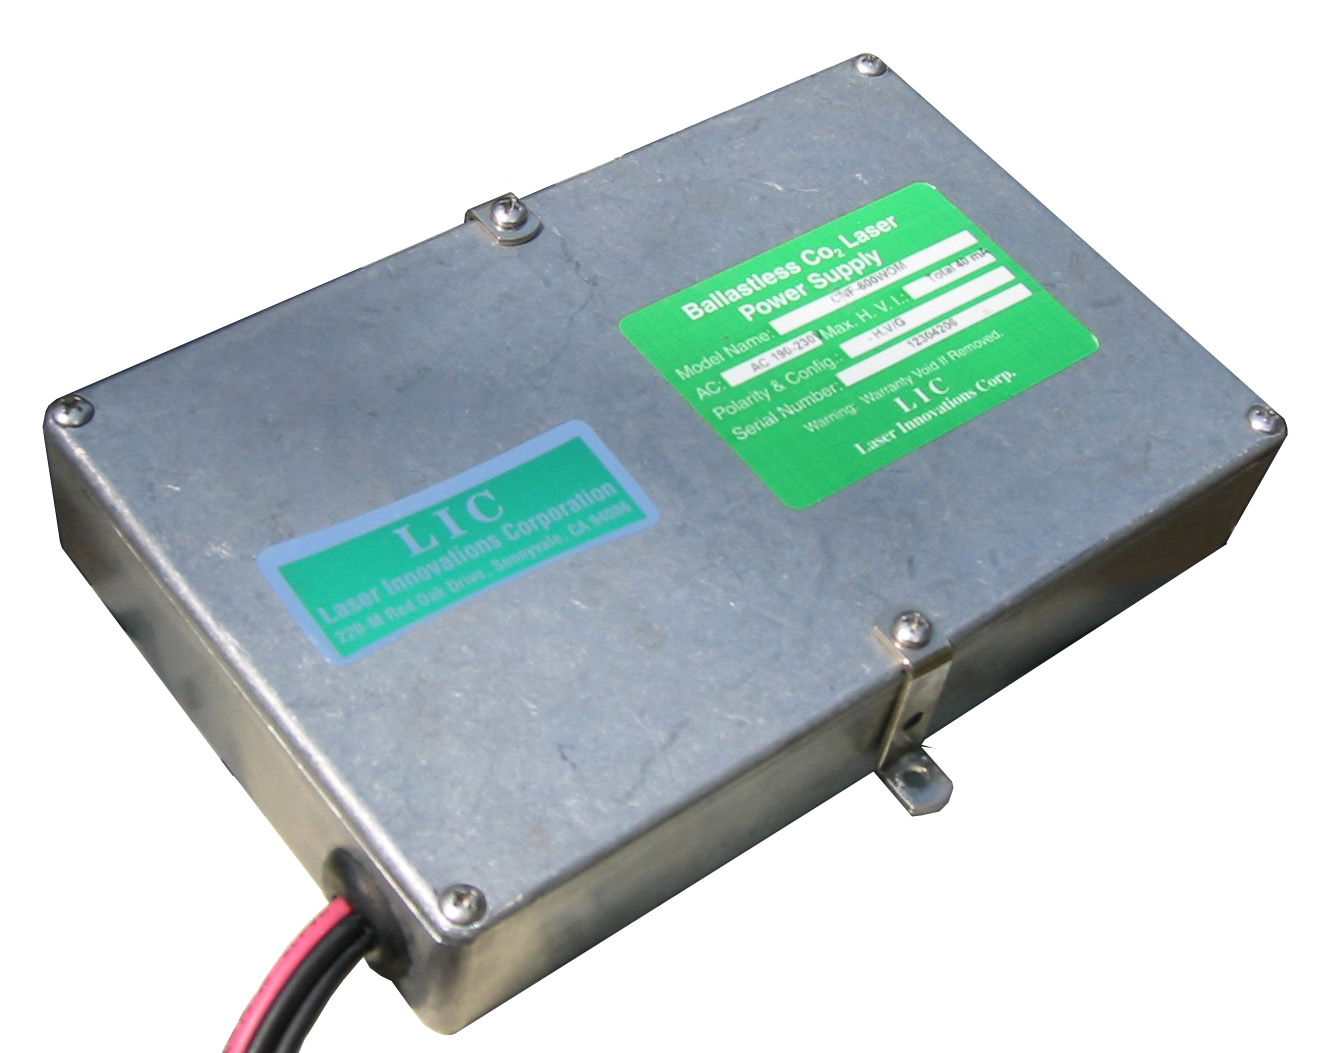 CPZ-200 - Ultra Compact CO2 Laser Power Supply